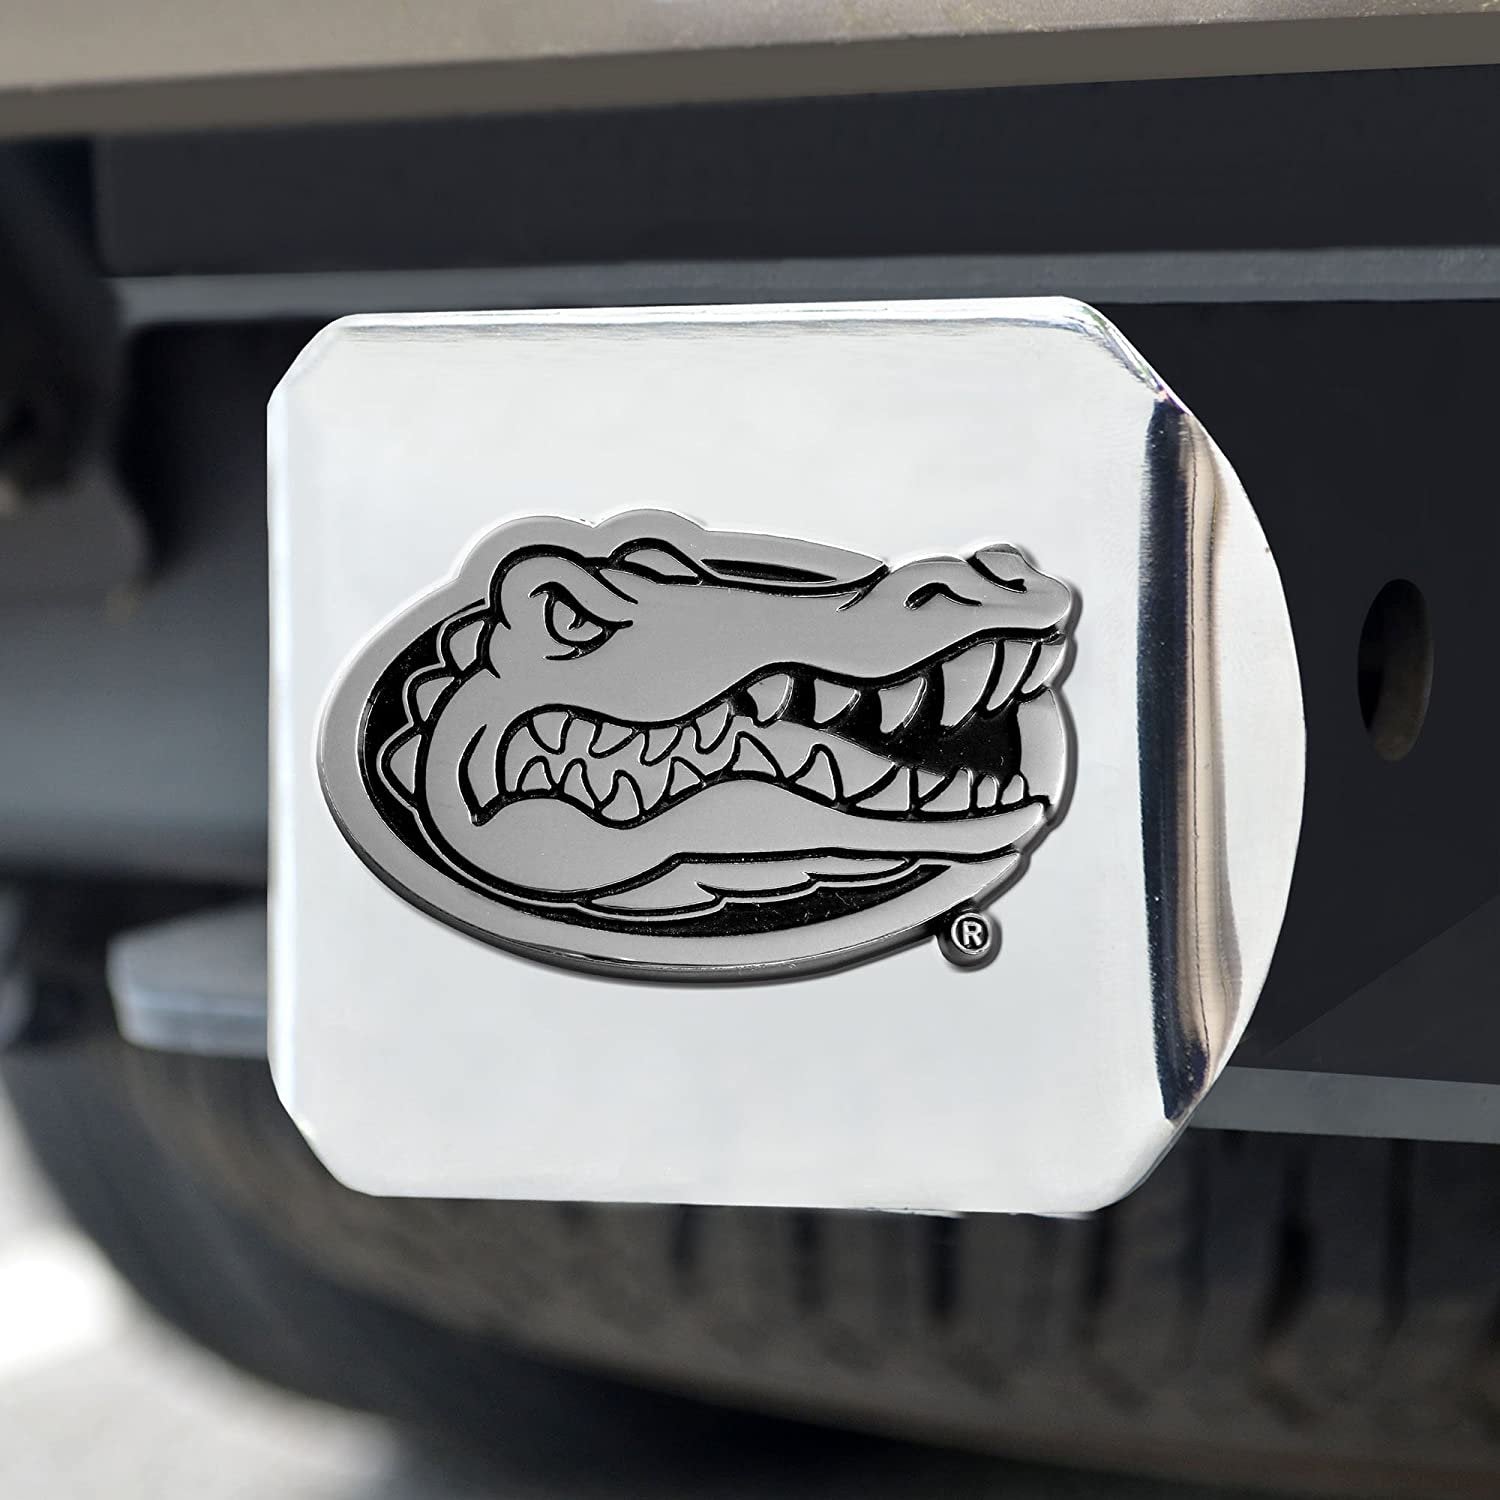 Florida Gators Hitch Cover Solid Metal with Raised Chrome Metal Emblem 2" Square Type III University of